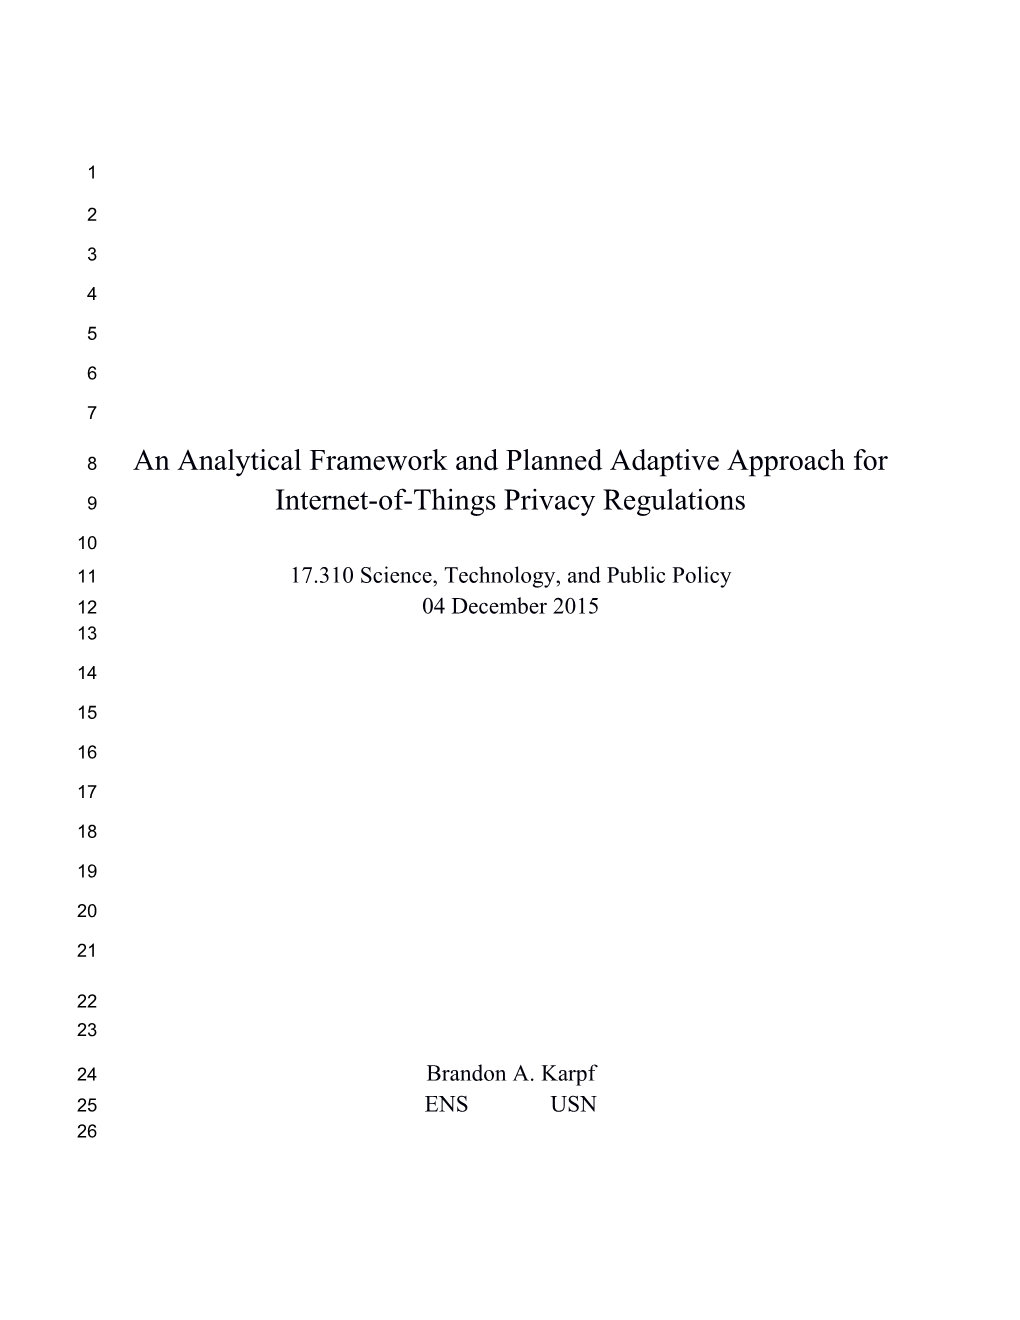 An Analytical Framework and Planned Adaptive Approach for Internet-Of-Things Privacy Regulations